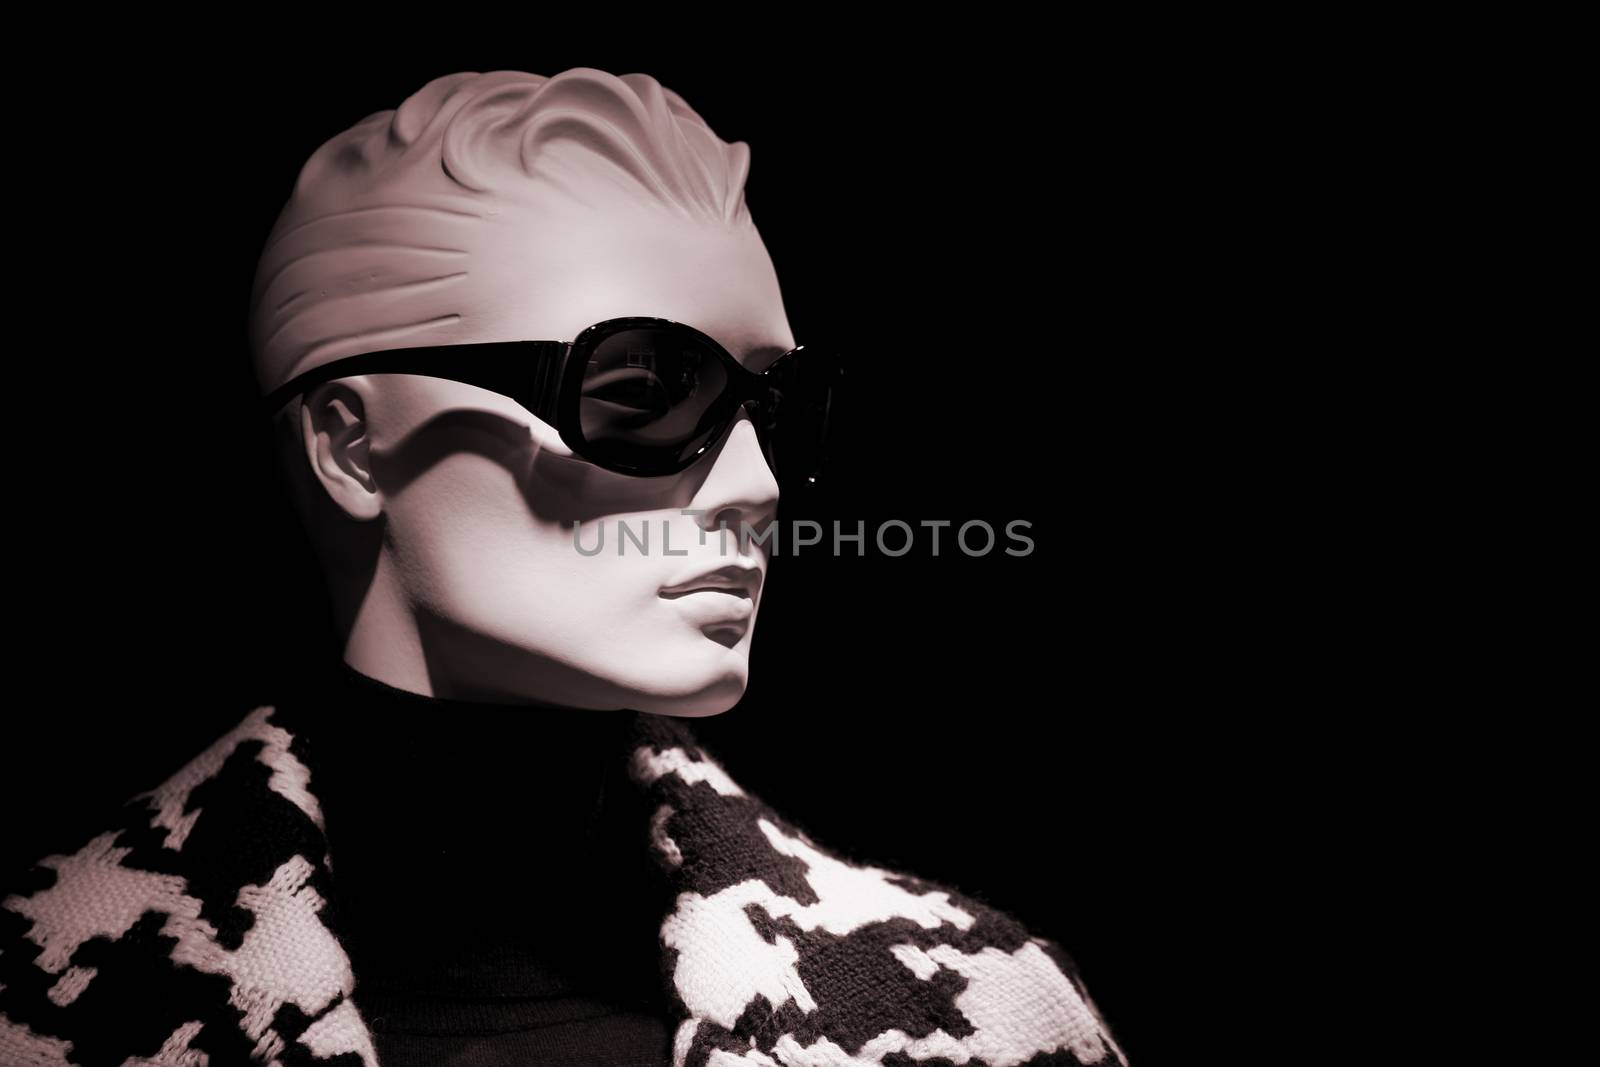 Shop dummy store mannequin female in sunglasses  by edwardolive